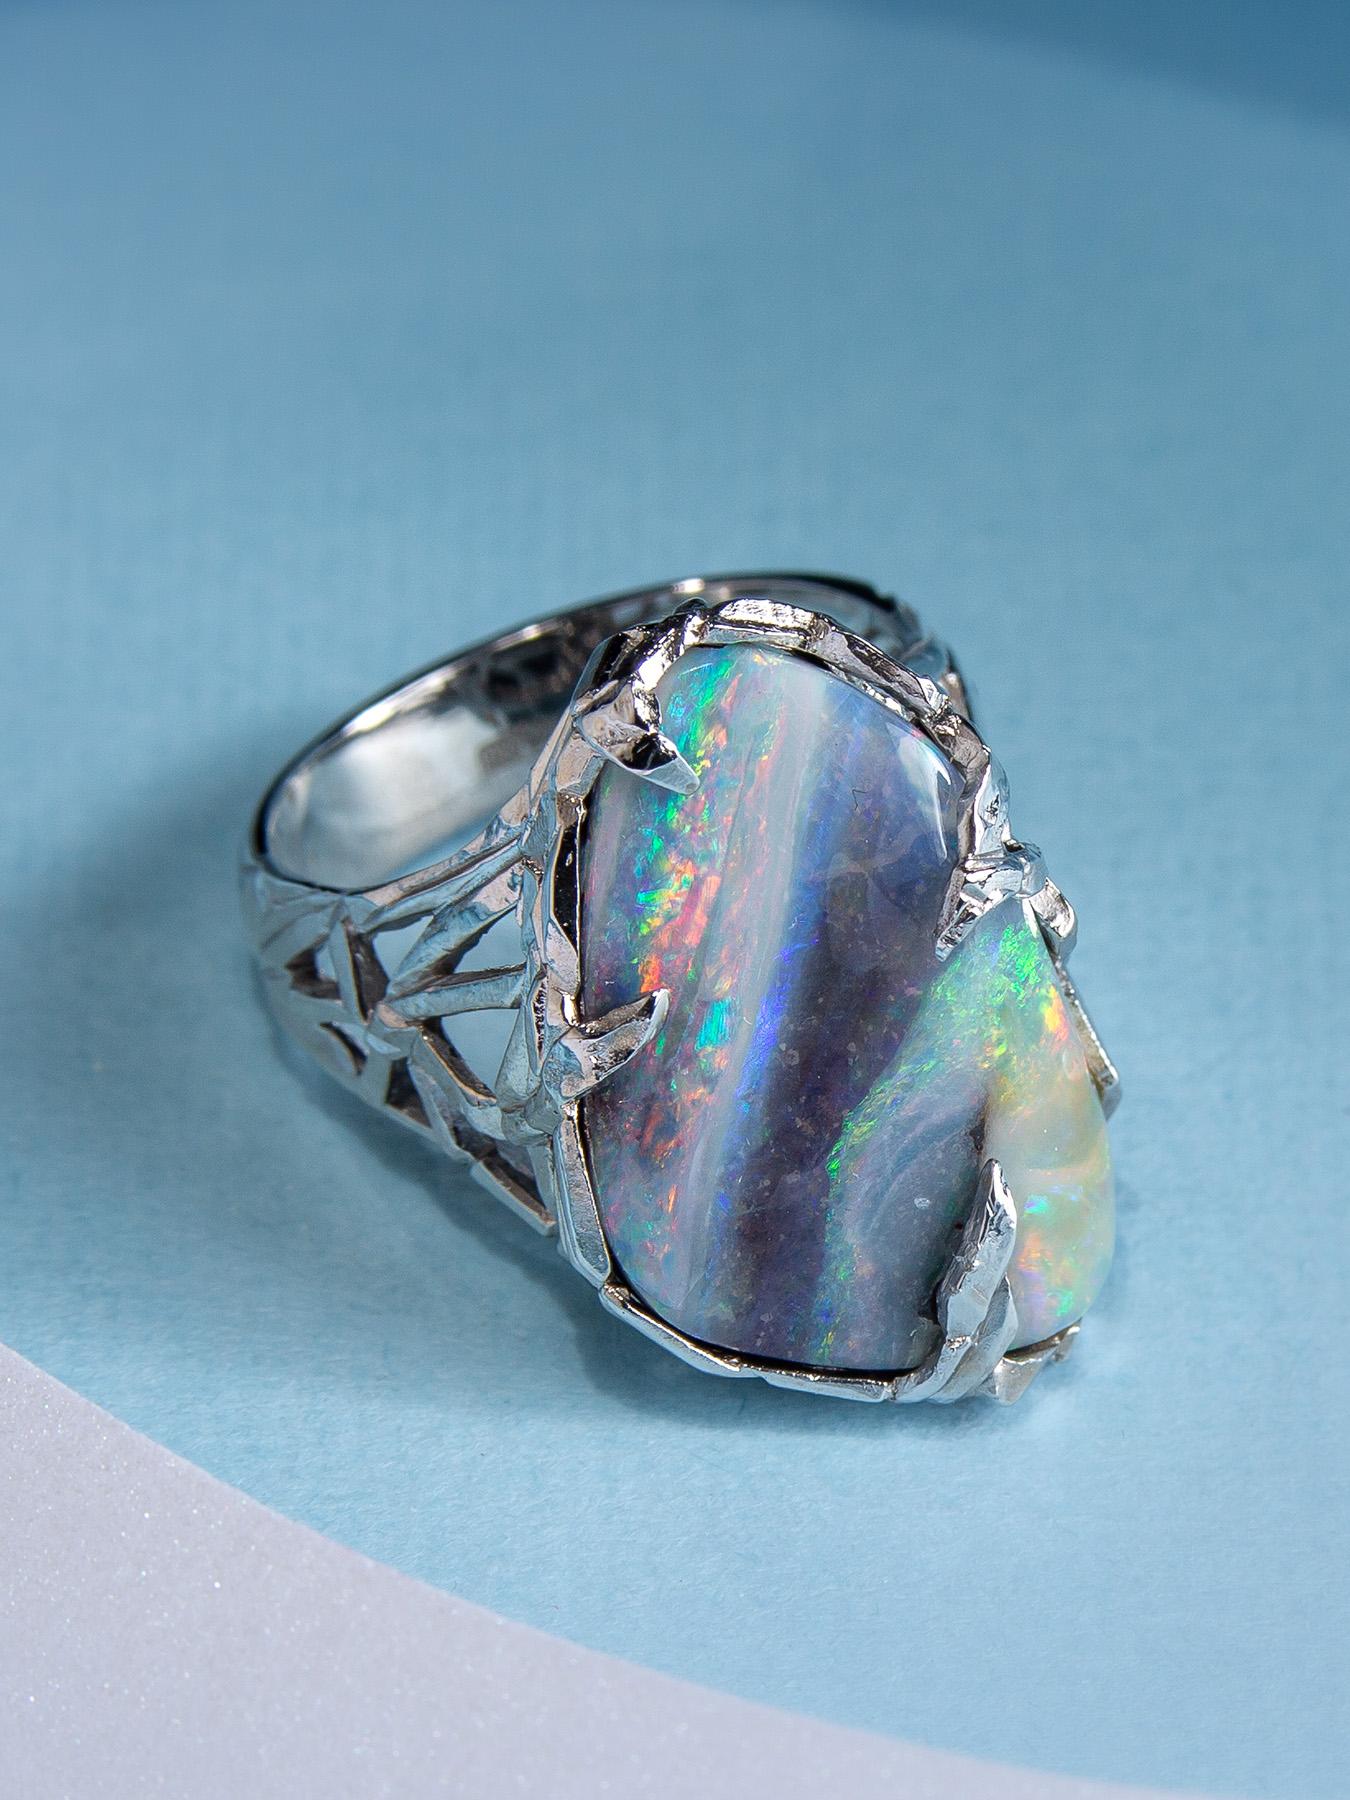 This ring has a majestic Boulder Opal in a sublime White Gold body that has a medieval structured design. Crafted with utmost precision, the Boulder Opal has a brilliantly polished surface along with its gorgeous play of color, lofty color bar, and